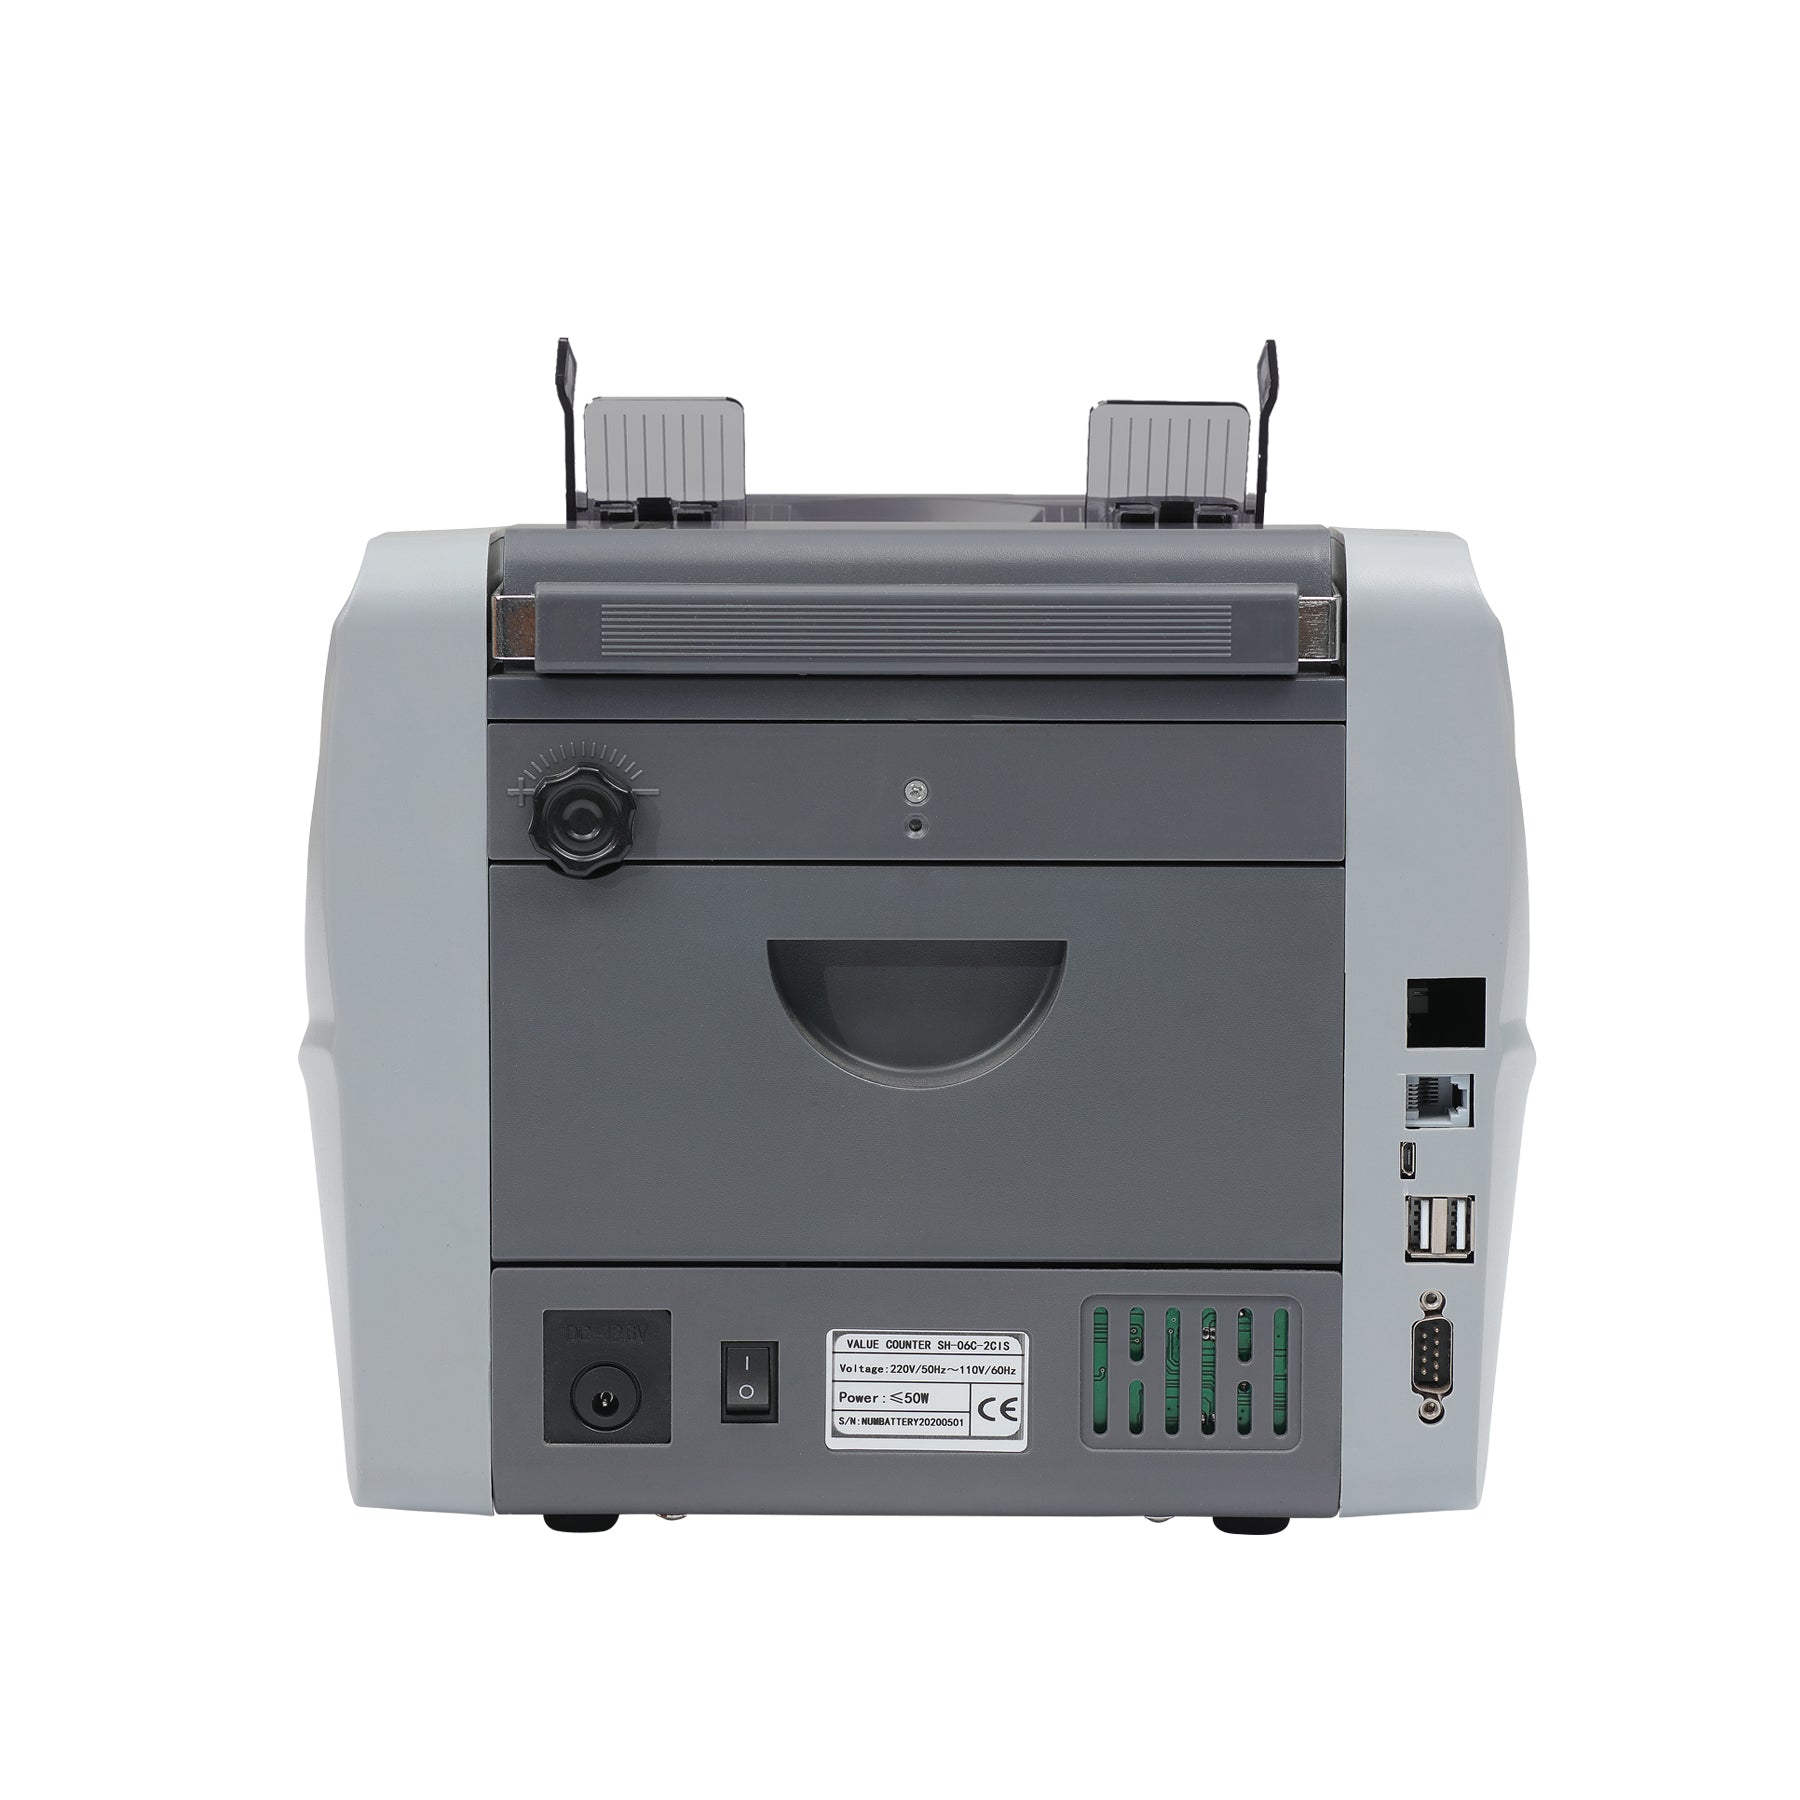 Top Loading Value Counter NW-970